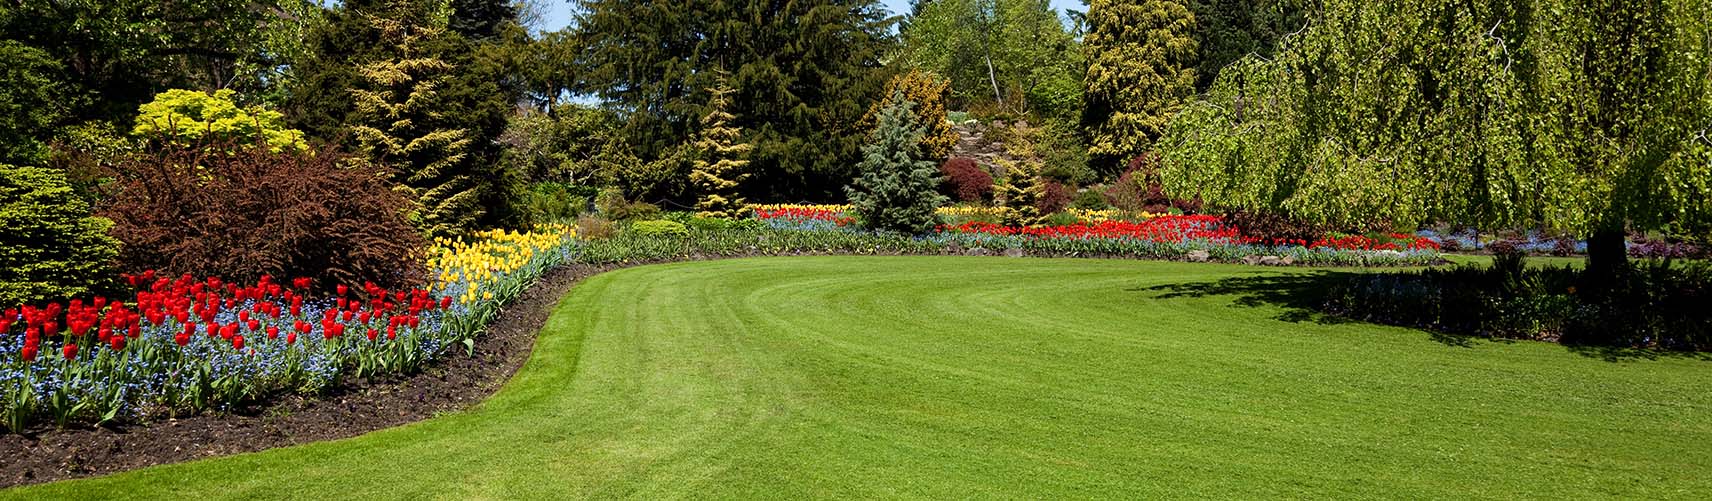 Fort Lauderdale Lawn Care Services, Landscaping Company and Lawn Service